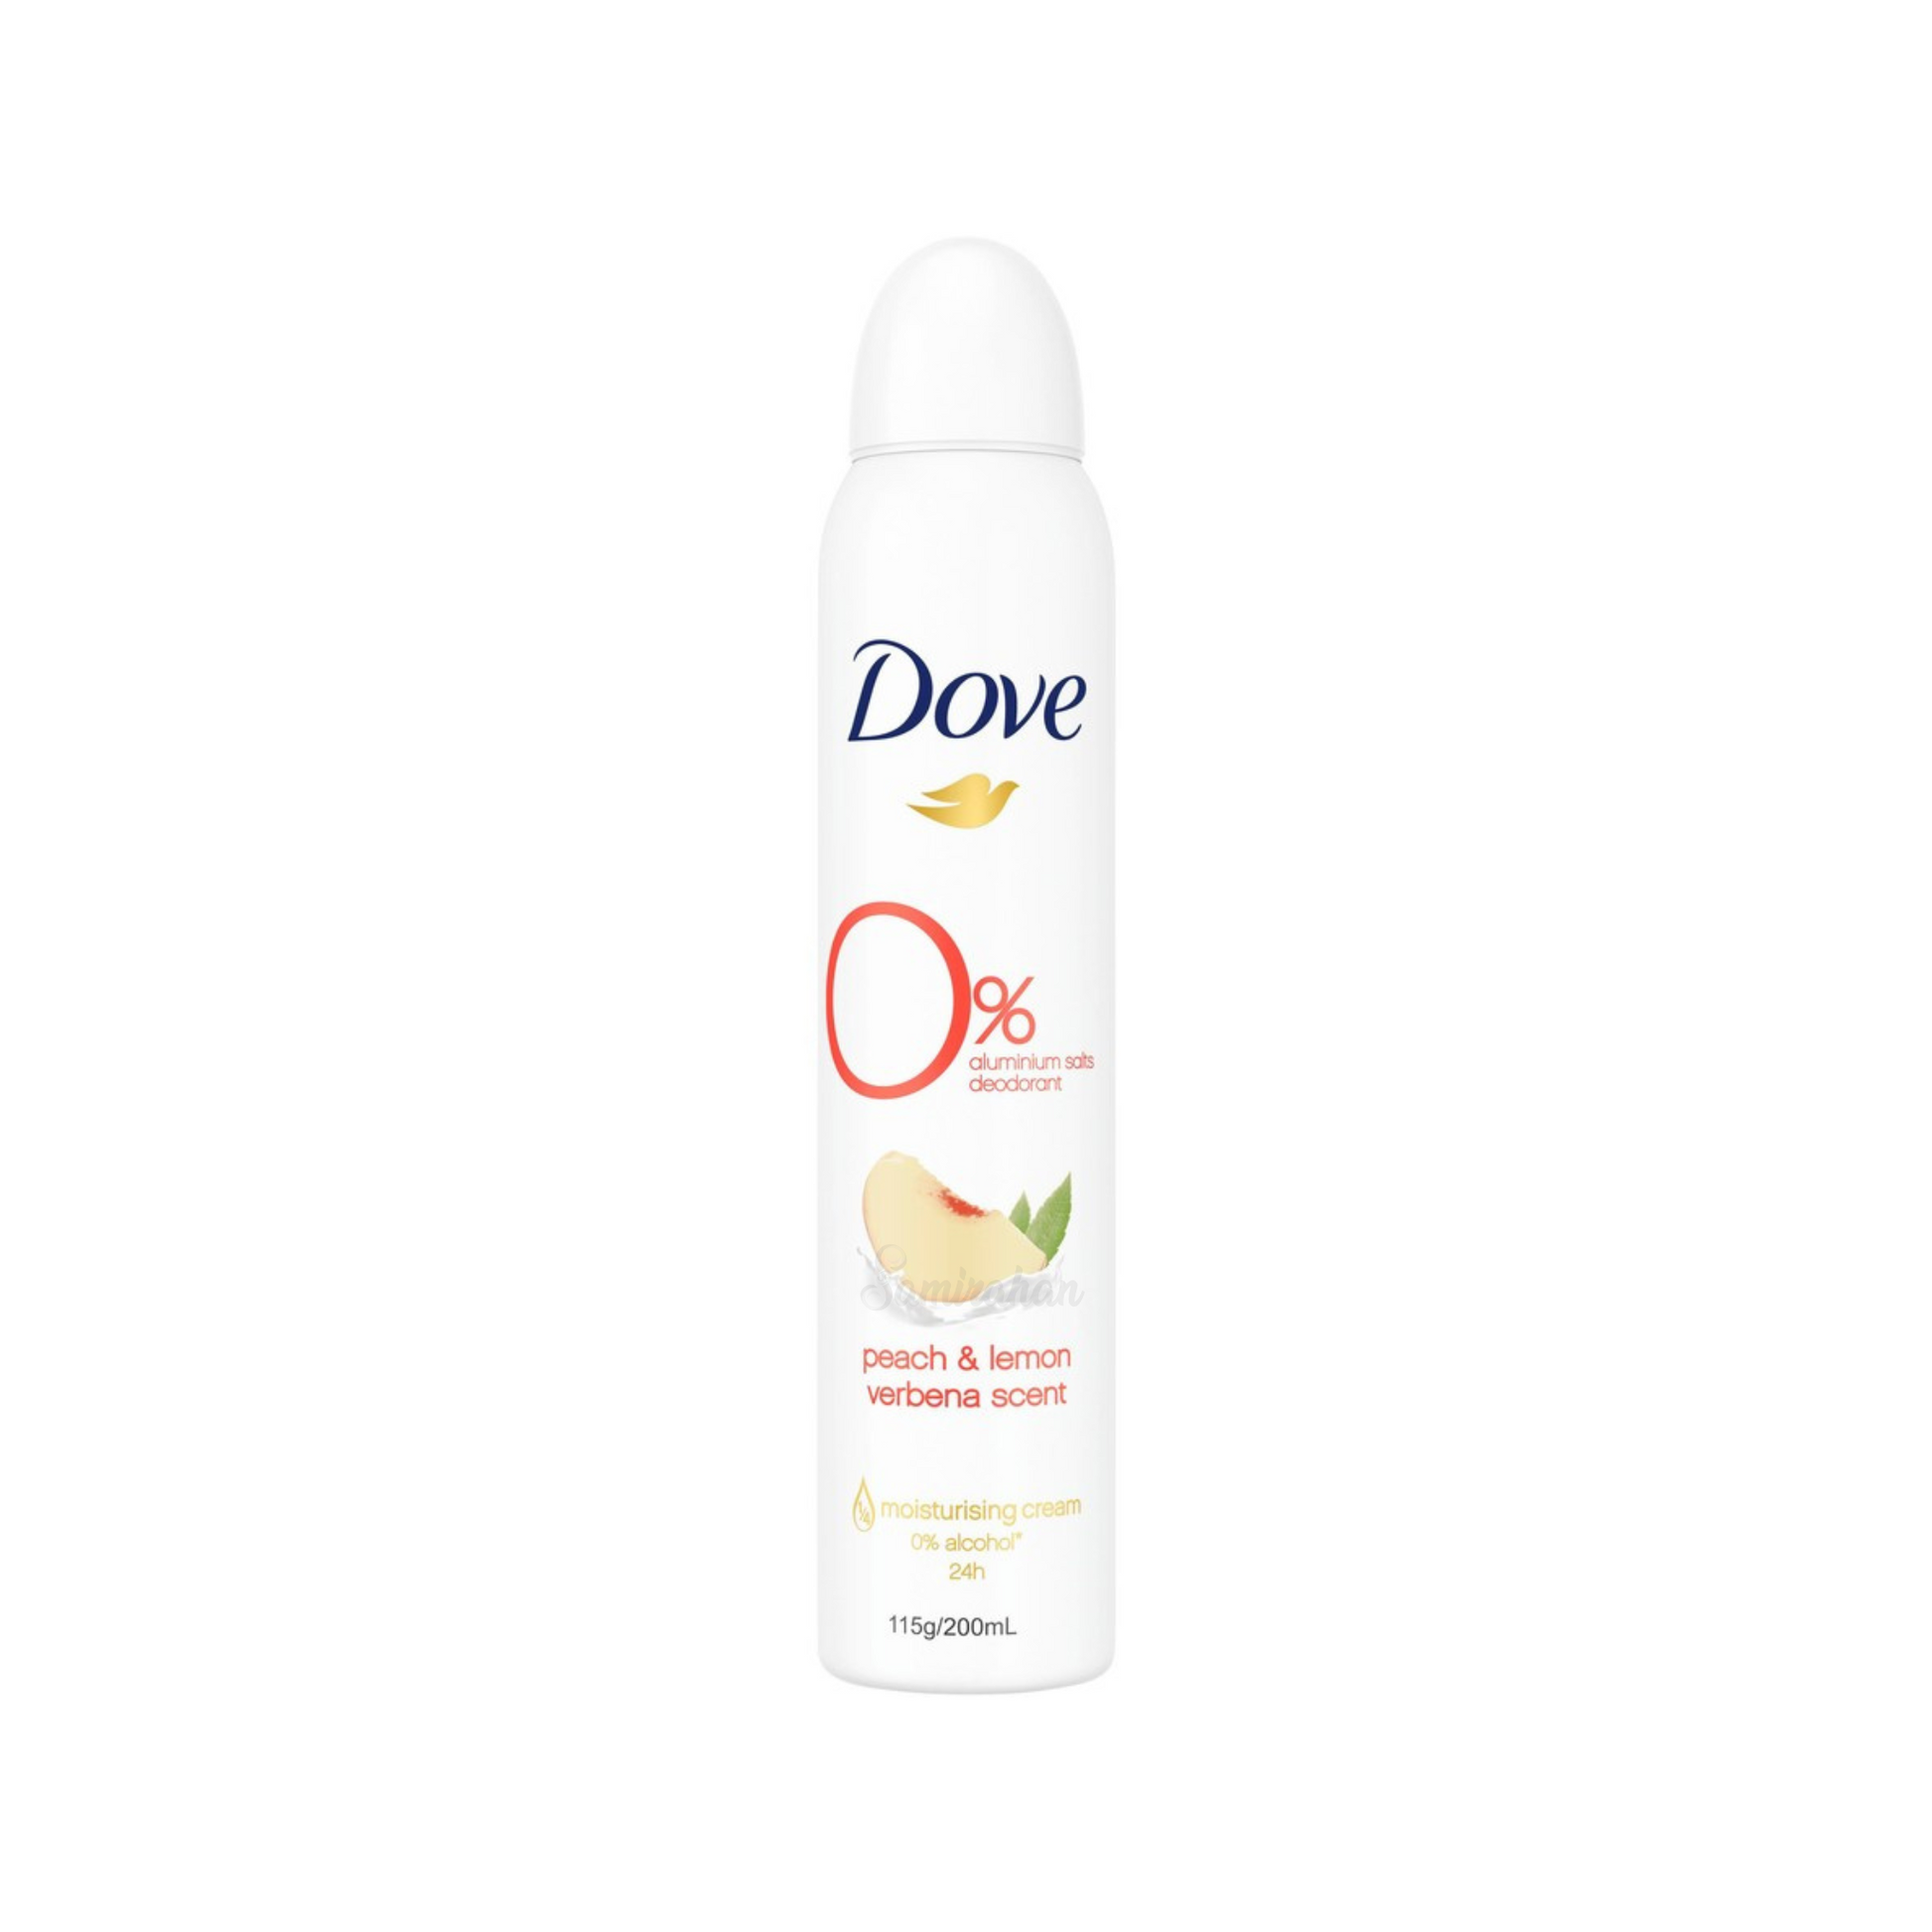 Dove Deodorant Peach & Lemon Verbena gives you underarm care that you can trust with 0% aluminium & alcohol. Best imported foreign Australian Aussie American genuine authentic original premium quality real hygiene skincare beauty skin care personal healthy underarms price in Dhaka Chittagong Sylhet Barisal Bangladesh.